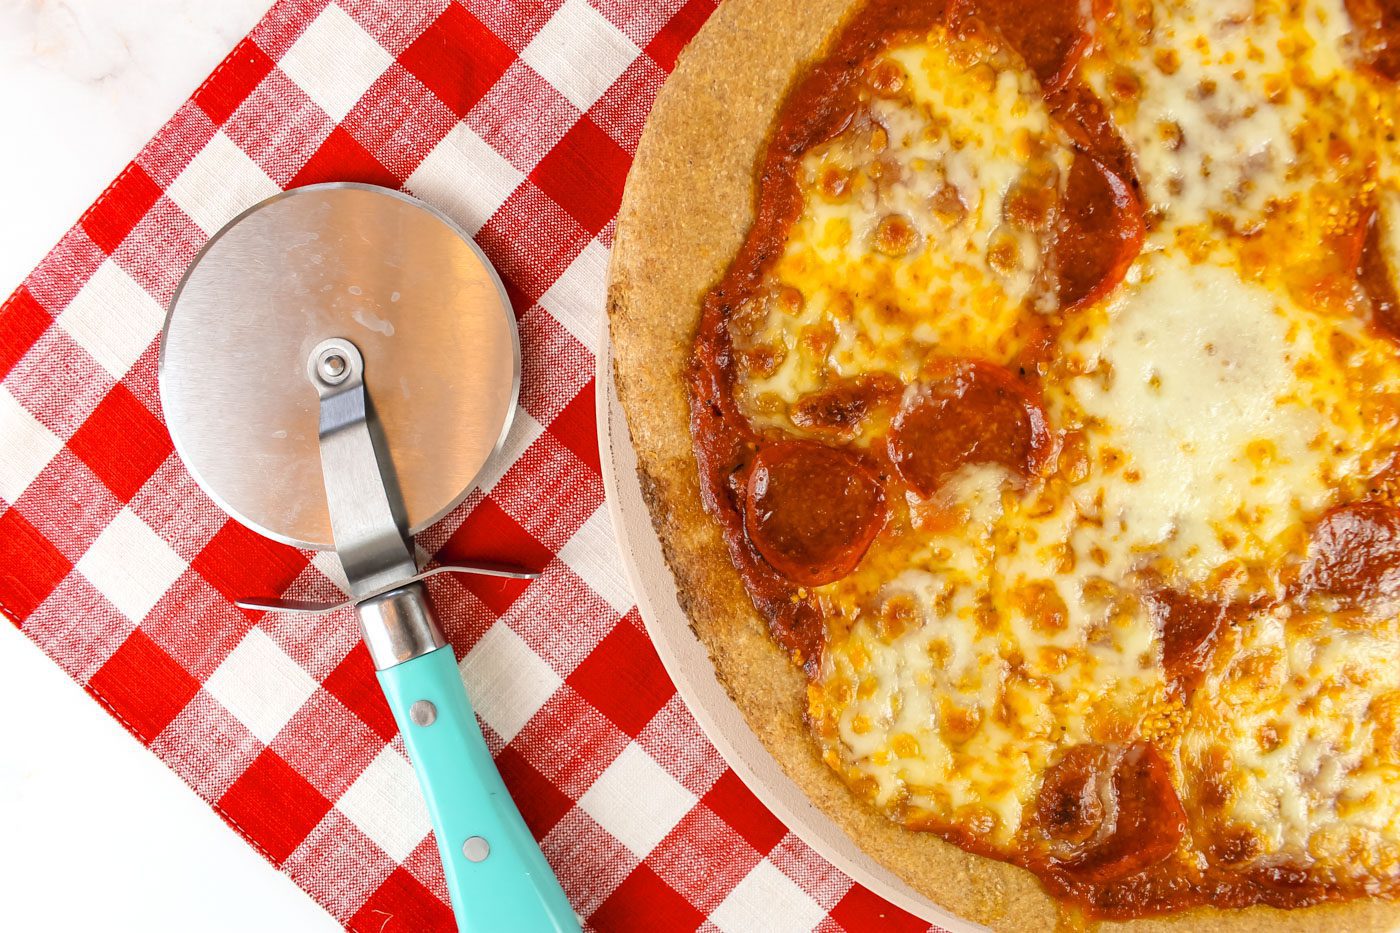 fresh baked pepperoni pizza sits next to a pizza cutter with a teal colored handle